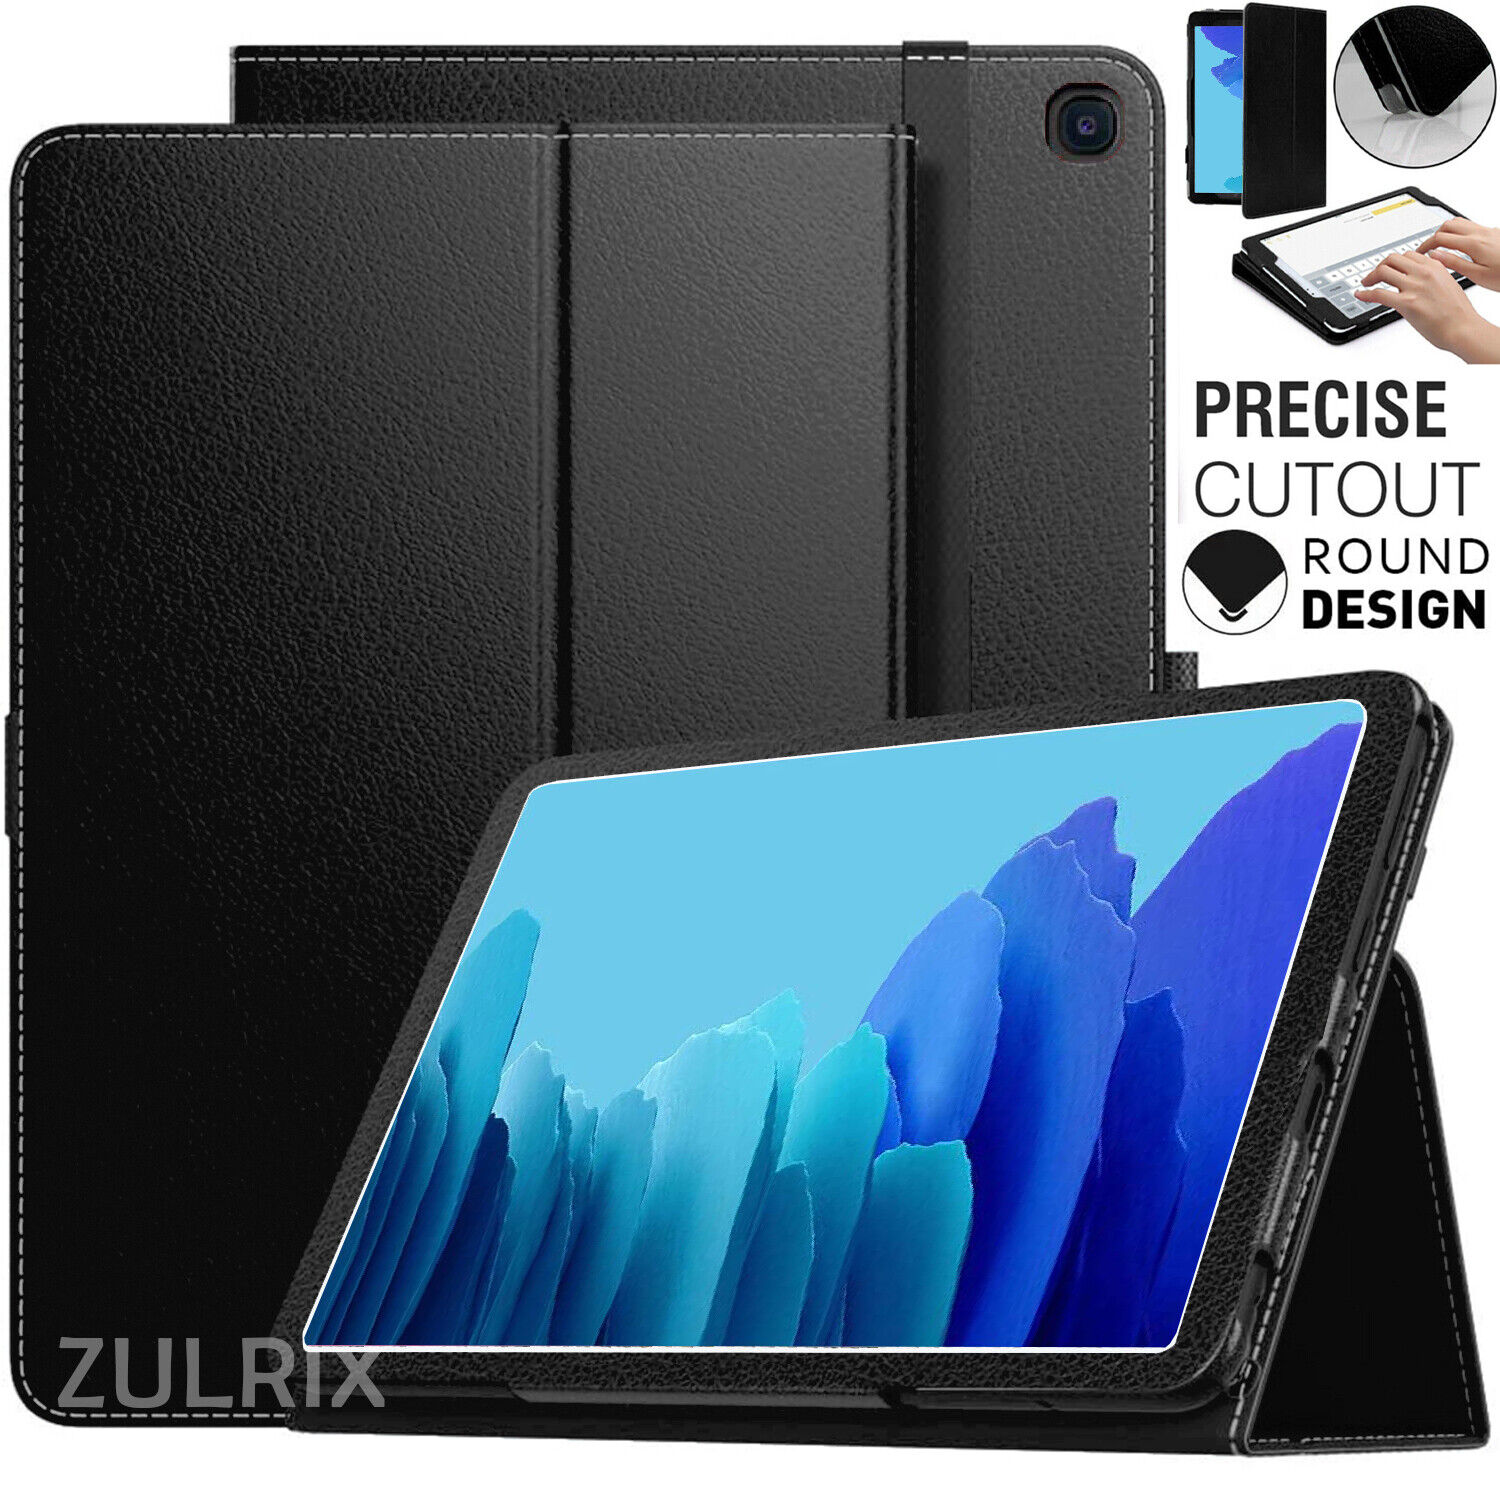 Smart Flip Leather Stand Case Cover For Samsung Galaxy Tab A7 10.4